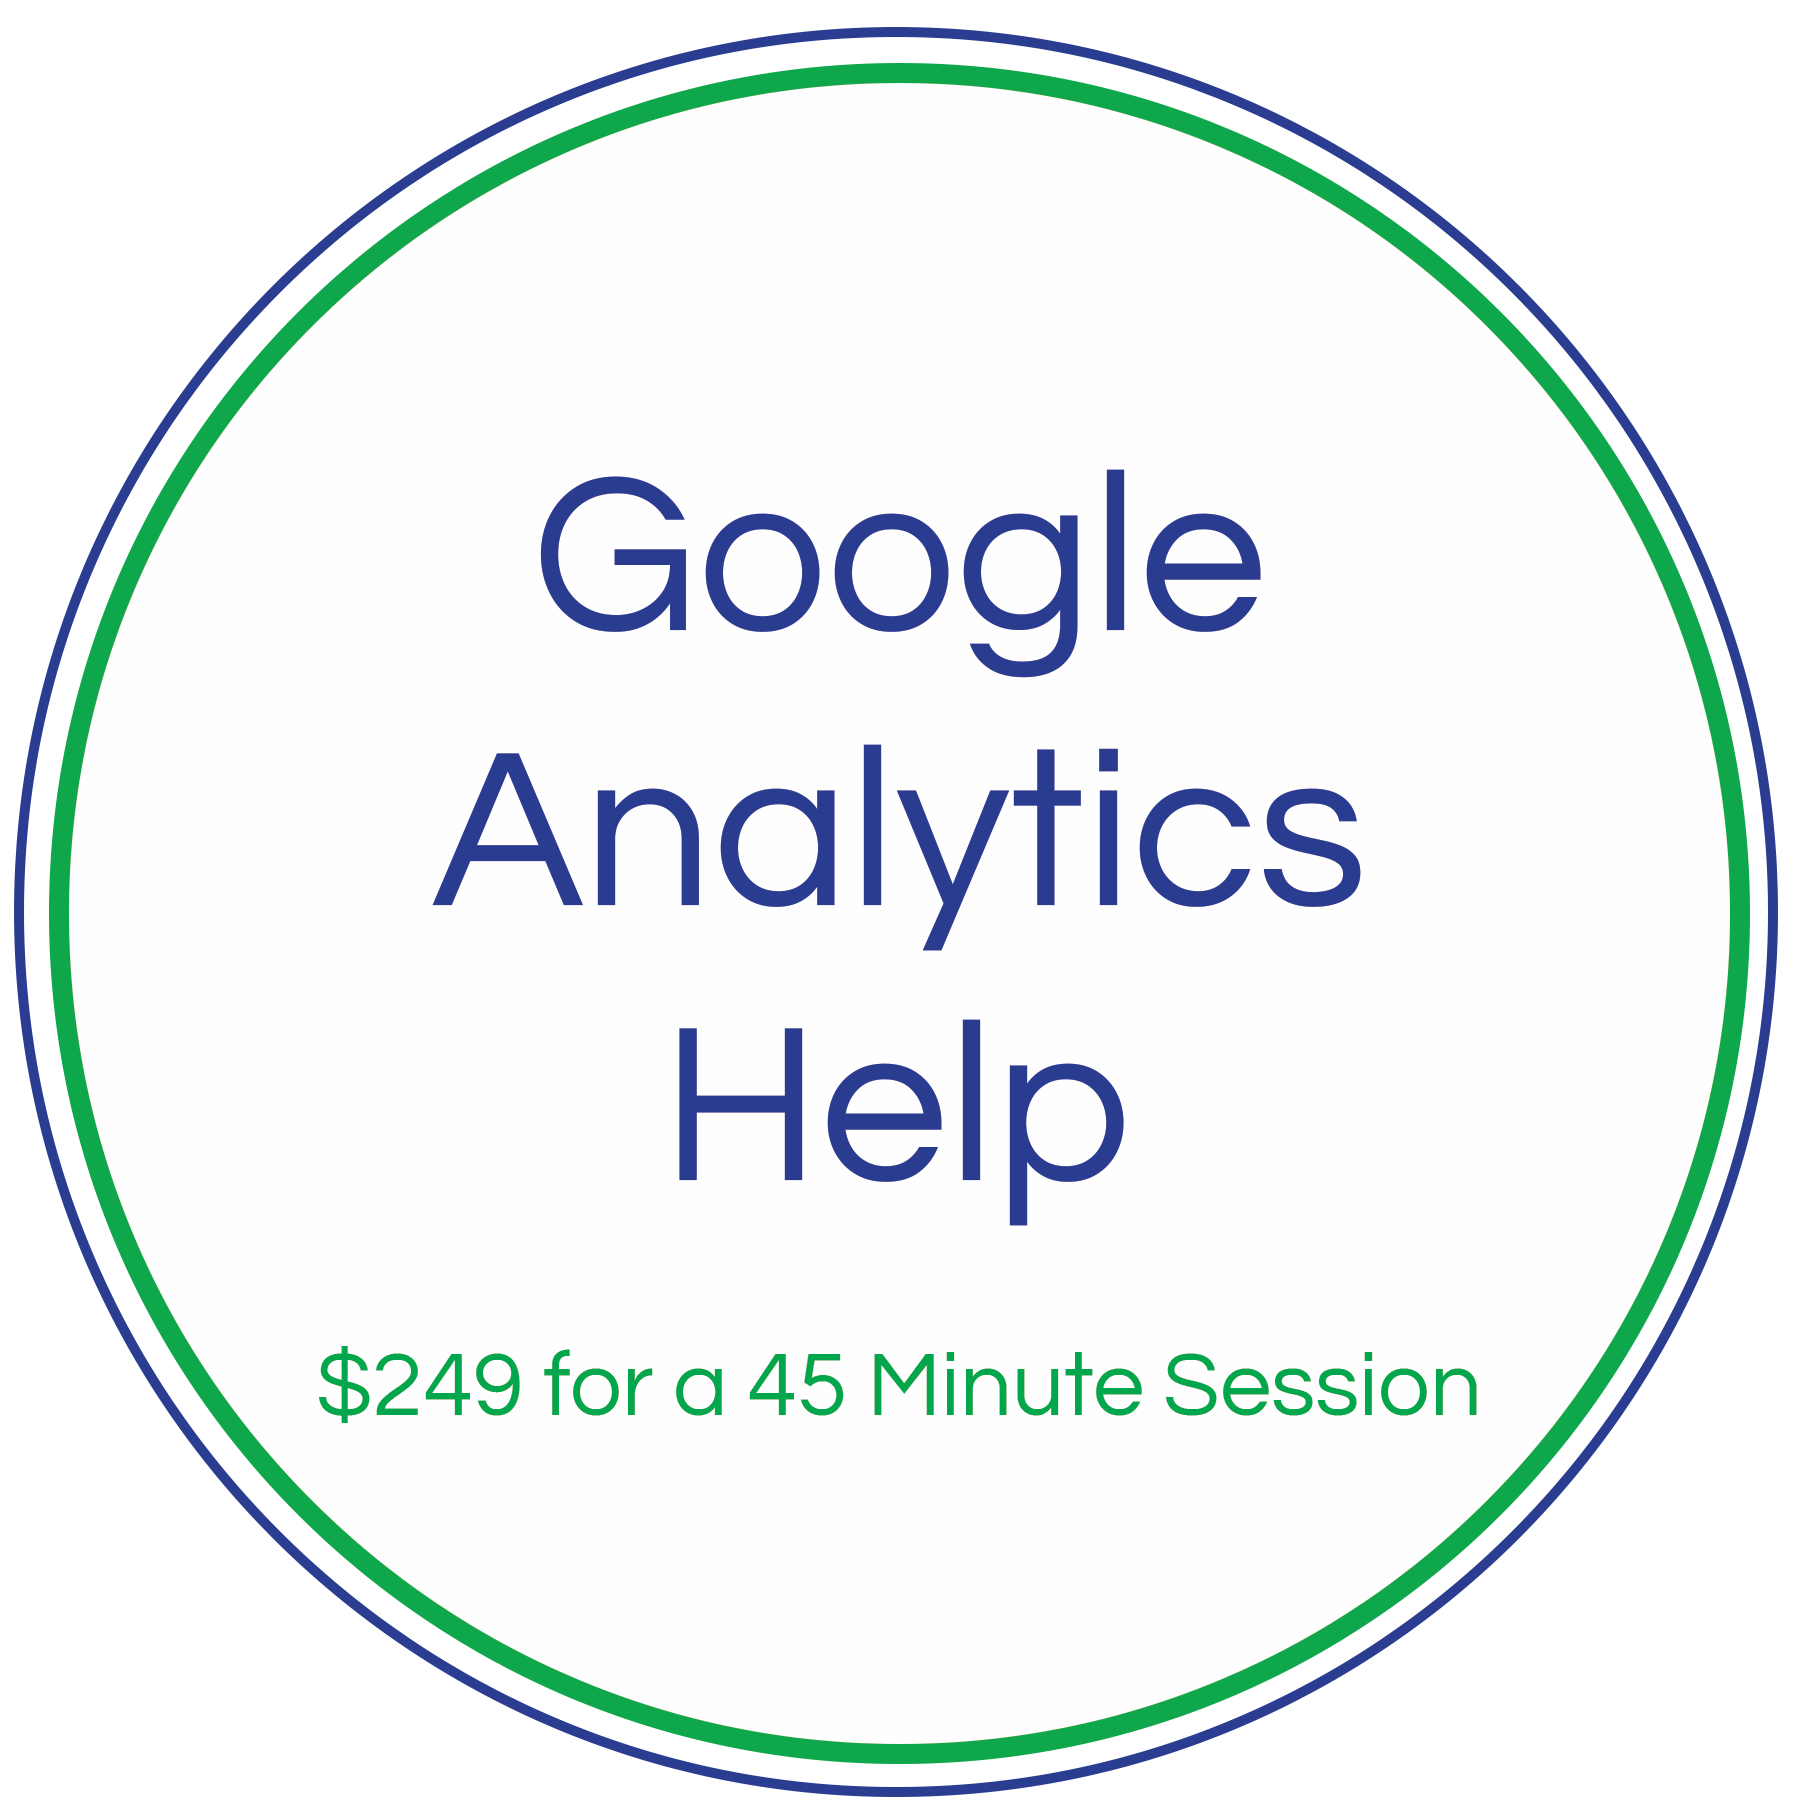 Google Analytics helps session for beginners and small business owners.